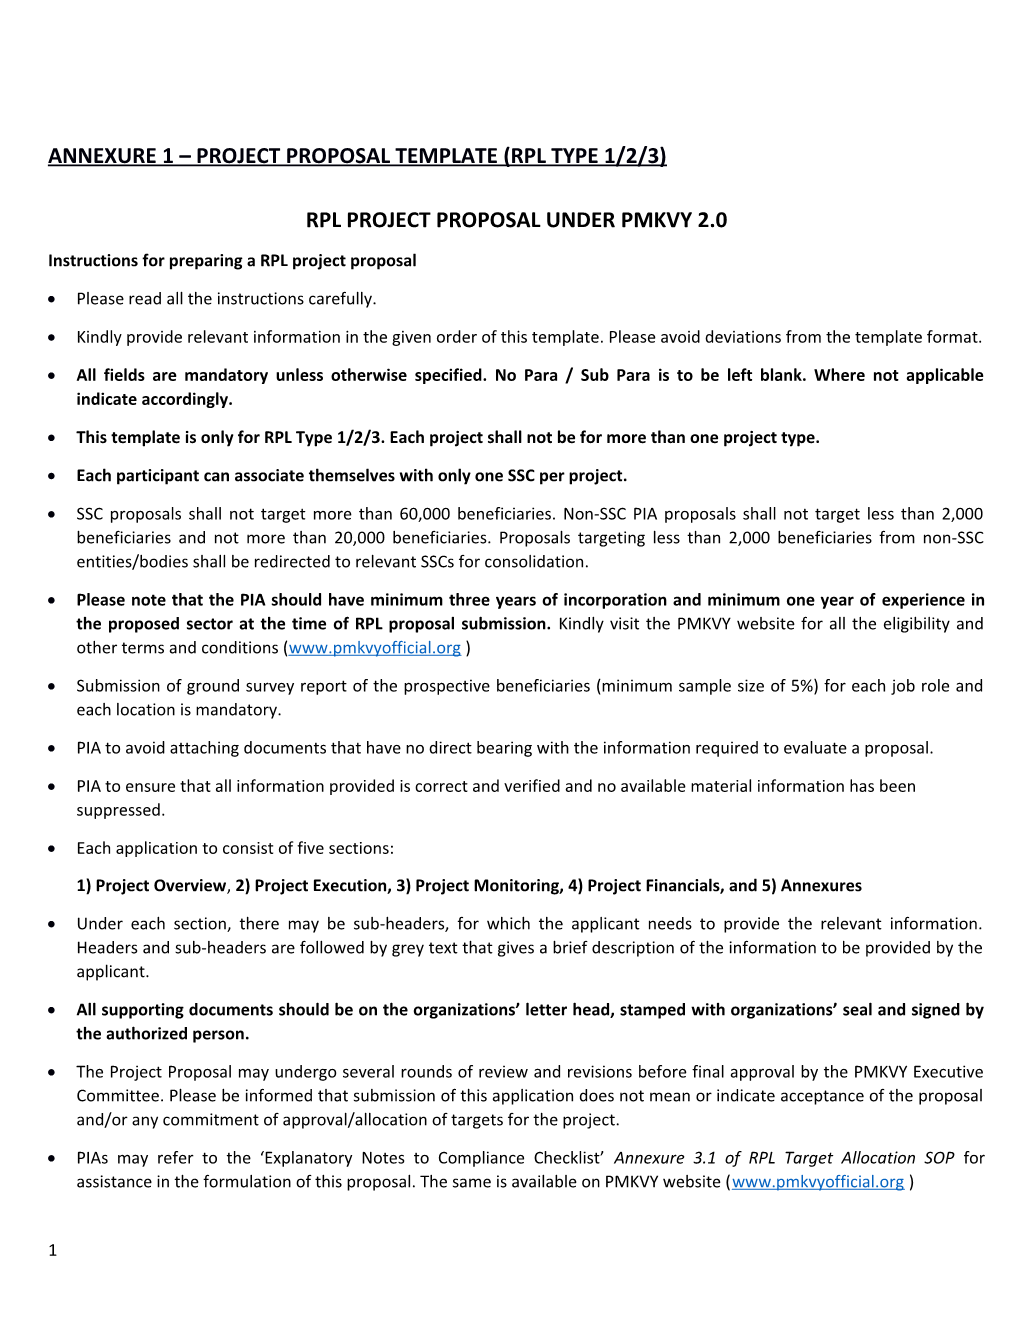 Annexure 1 Project Proposal Template (Rpl Type 1/2/3)